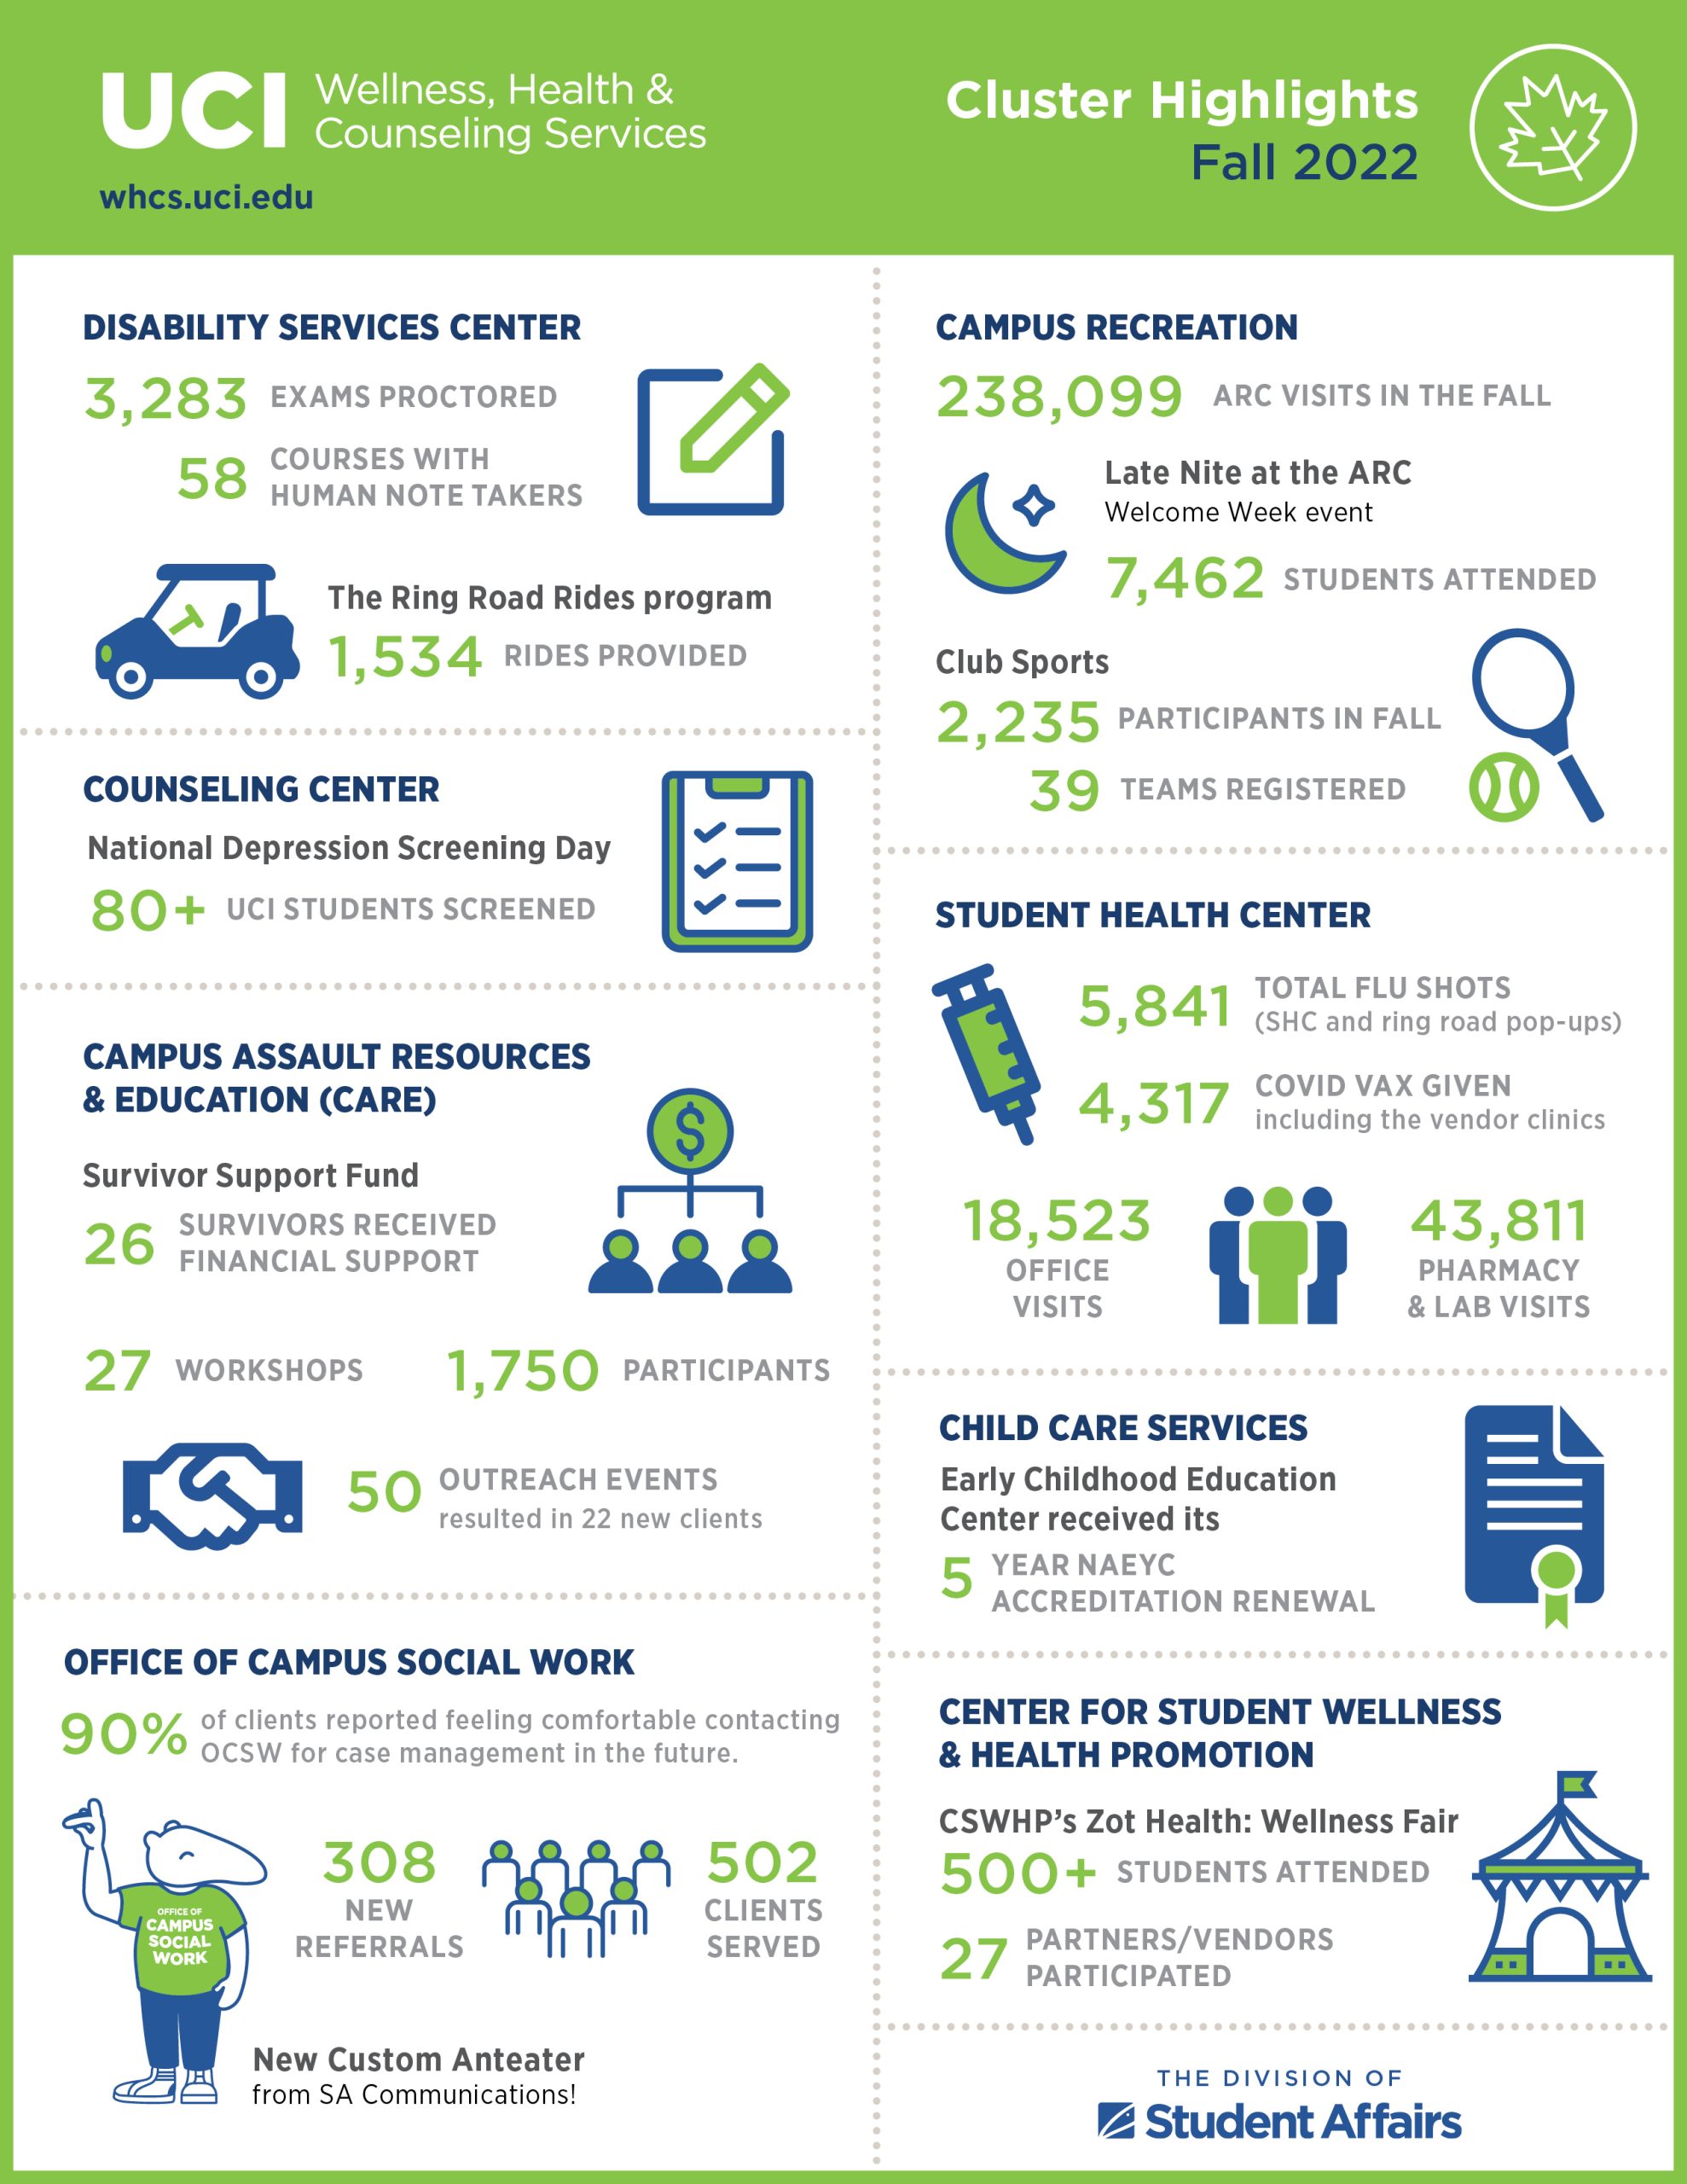 Wellness, Health & Counseling Services Fall 2022 Cluster Highlights